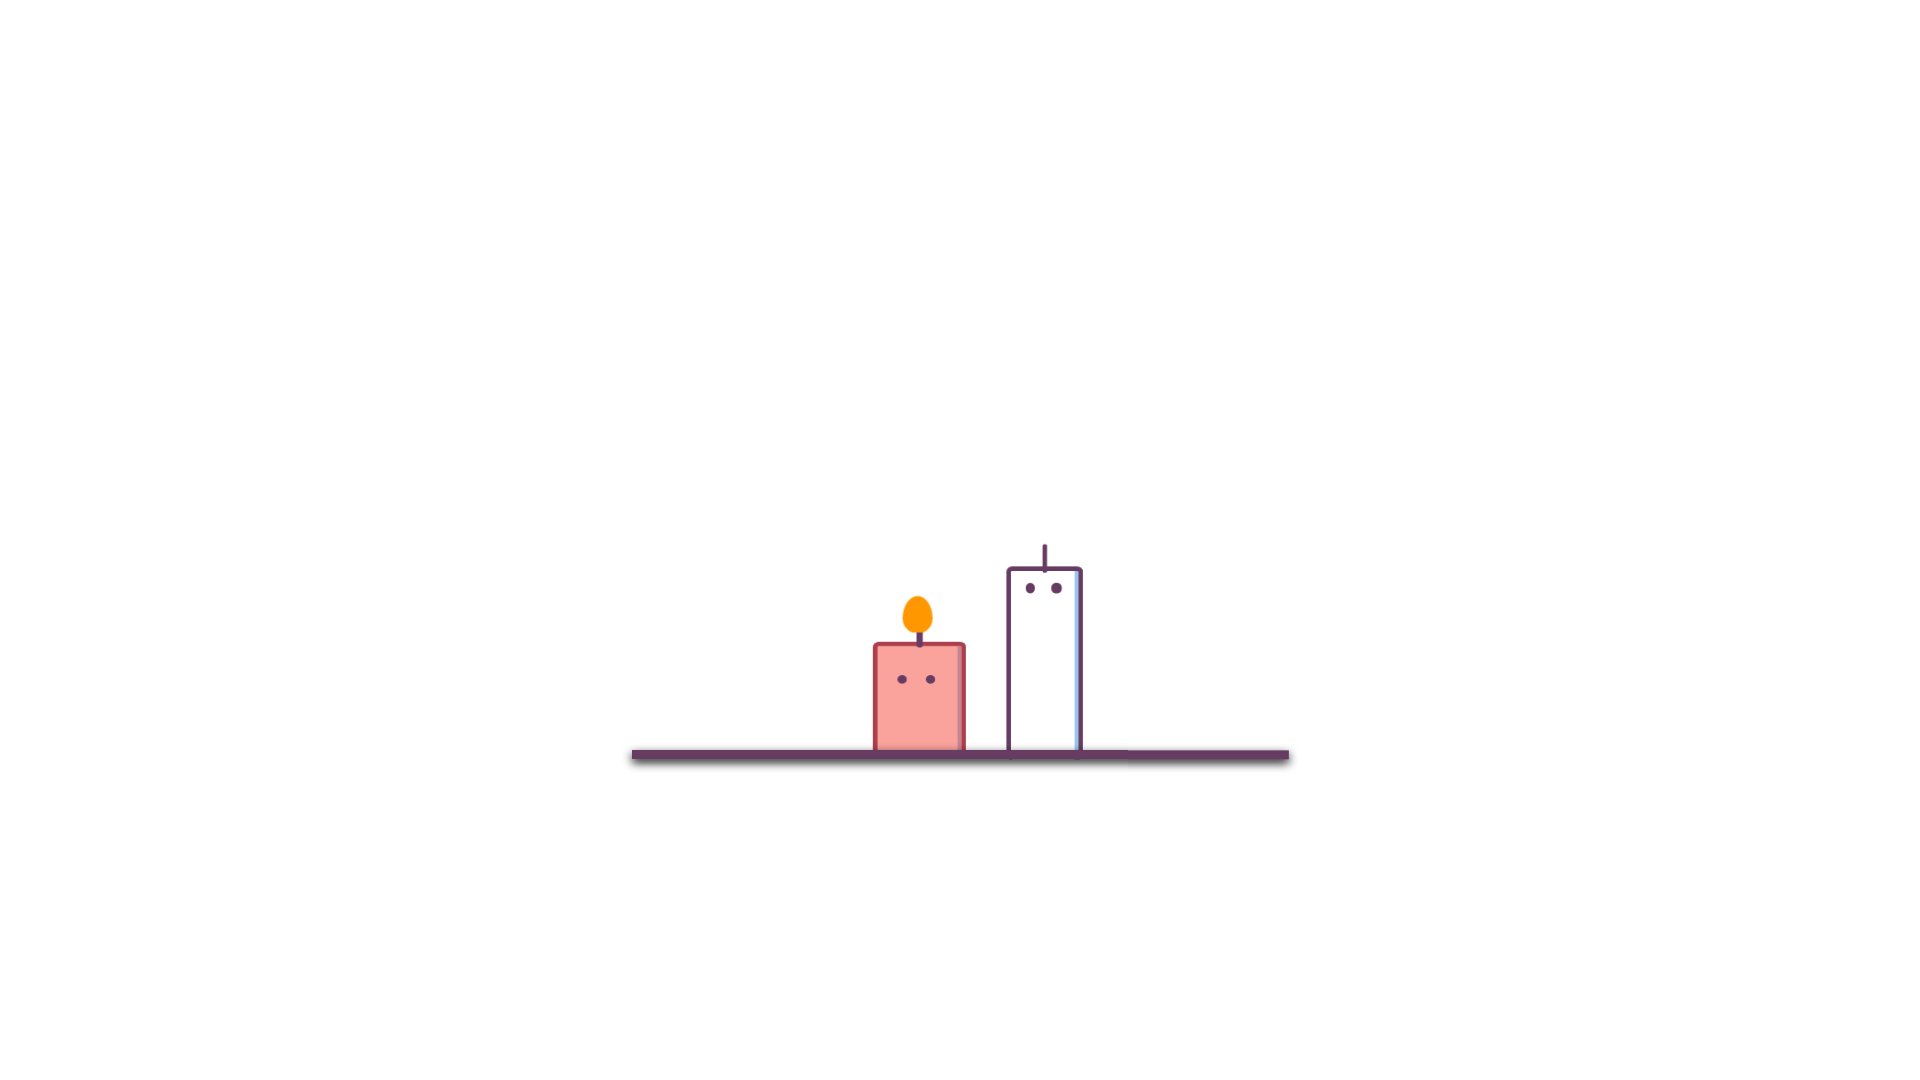 Funny Candle Pure CSS Keyframe Animation